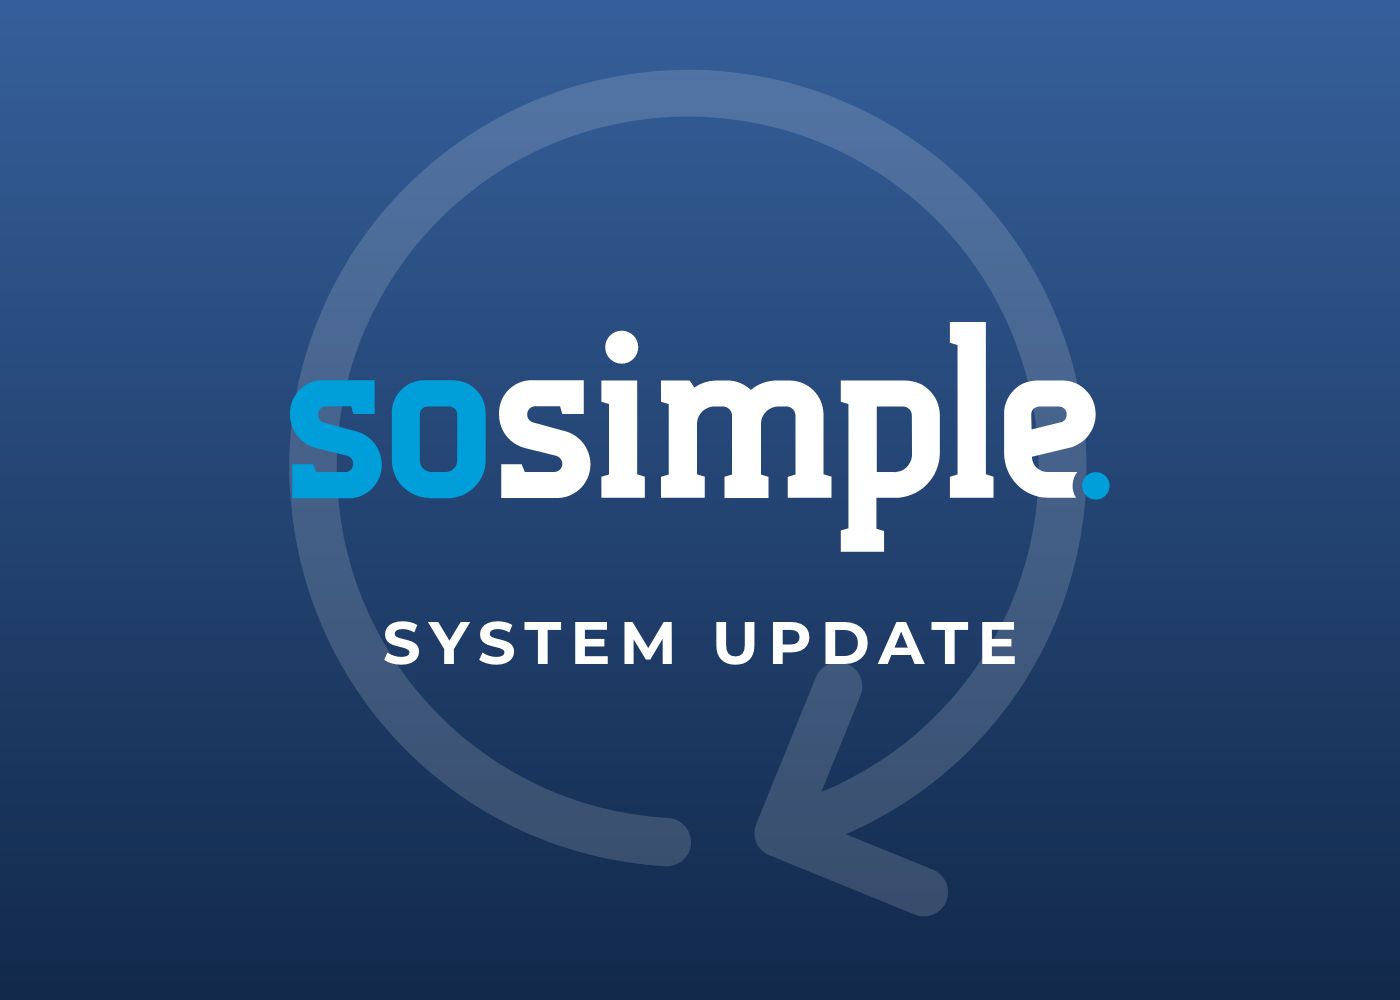 SoSimple Marketing+ Updates: NEW Marketing+ Dashboard & Quick Links Features and Interface Updates